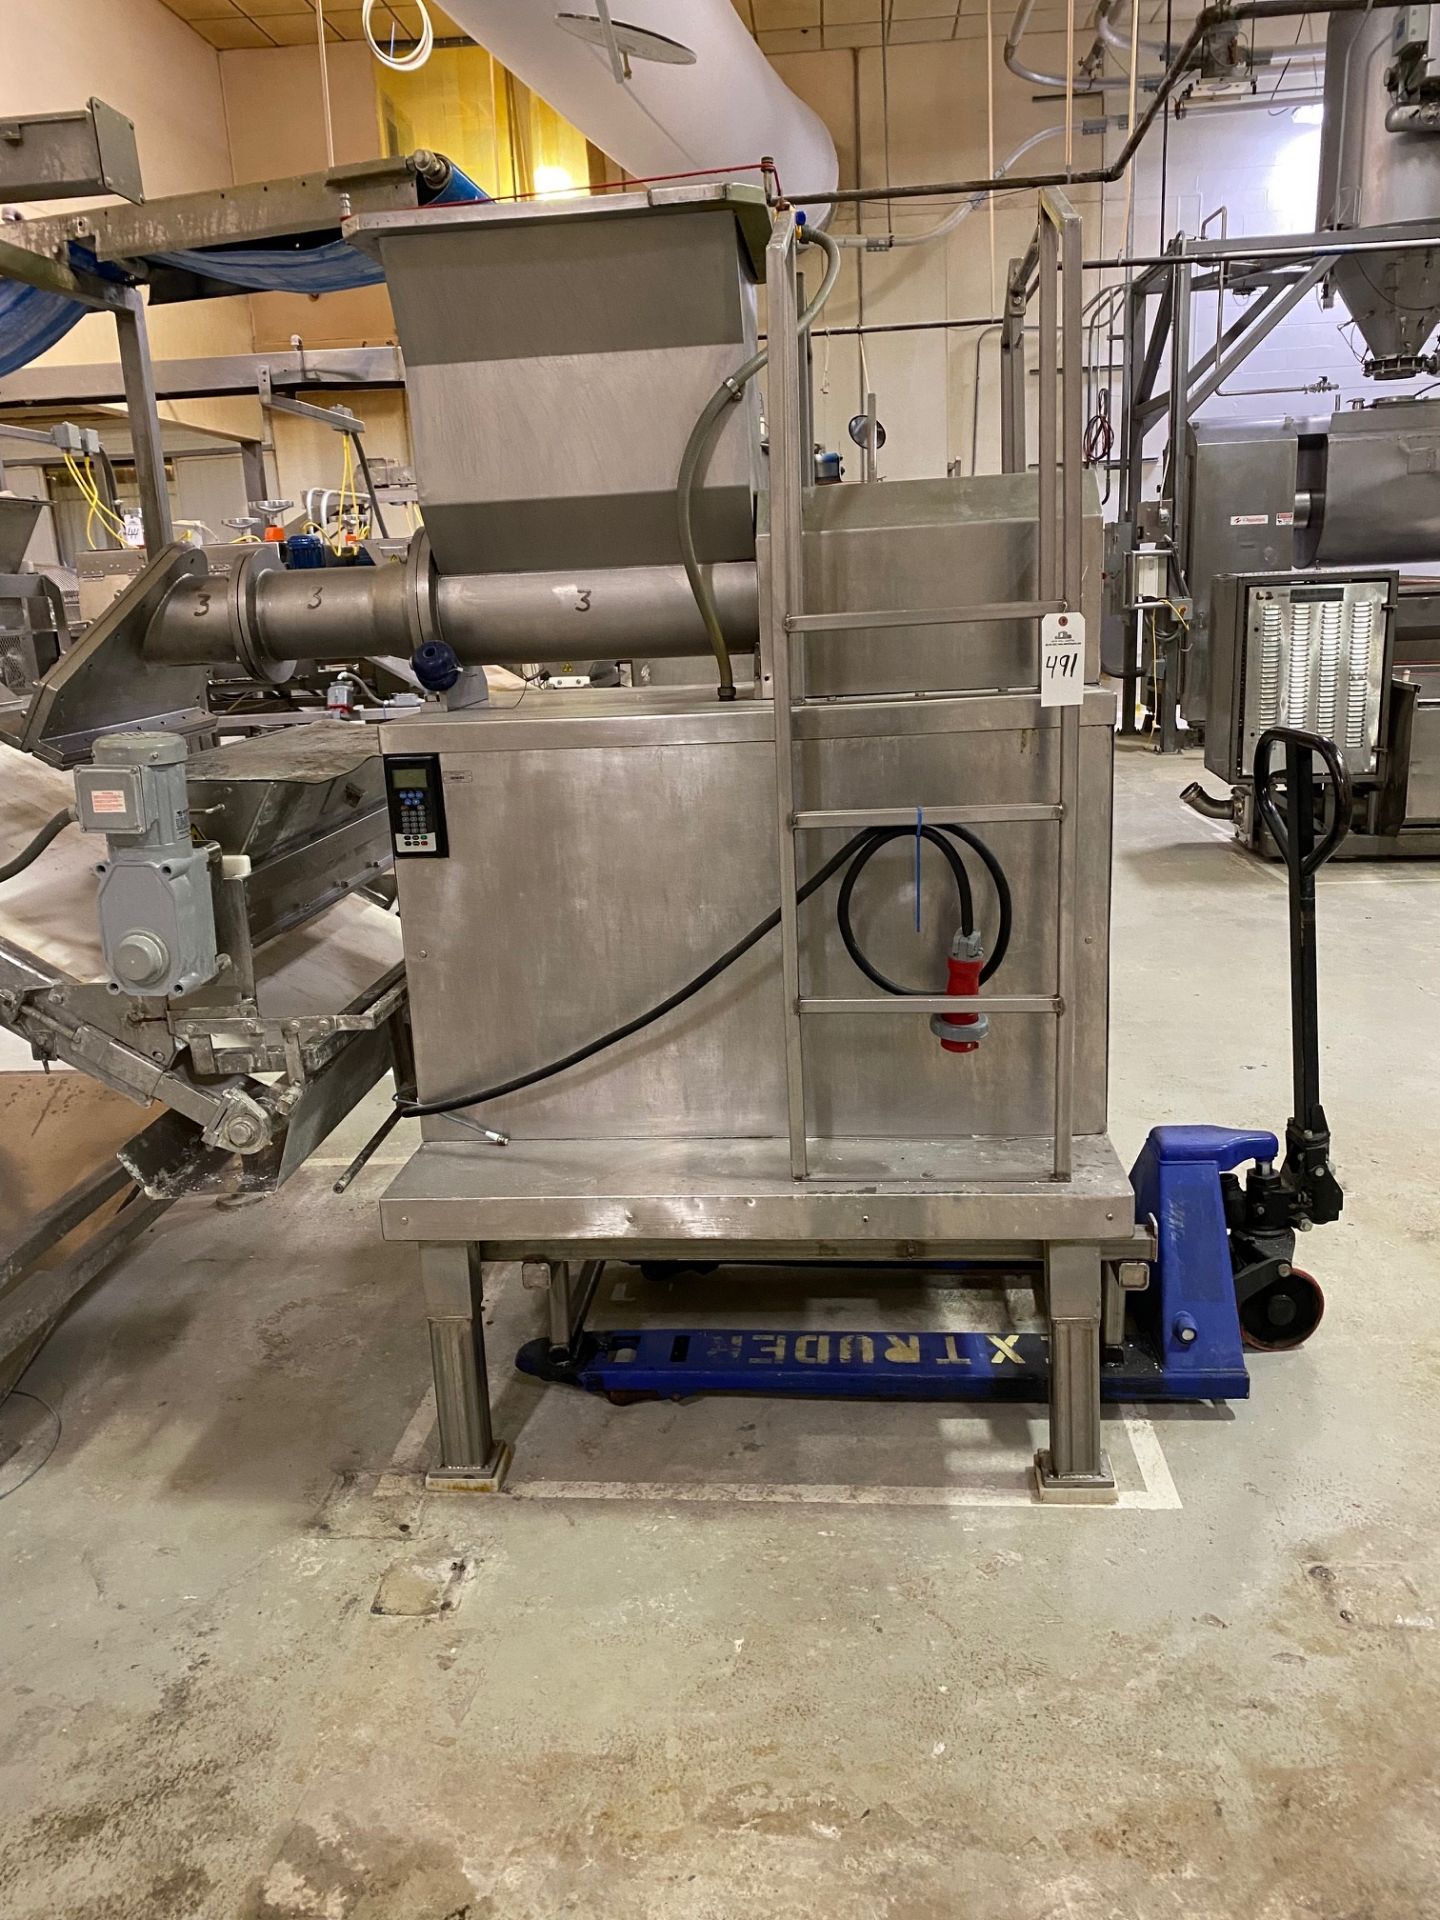 Stainless Steel Dough Sheet Extruder | Rig Fee: $350